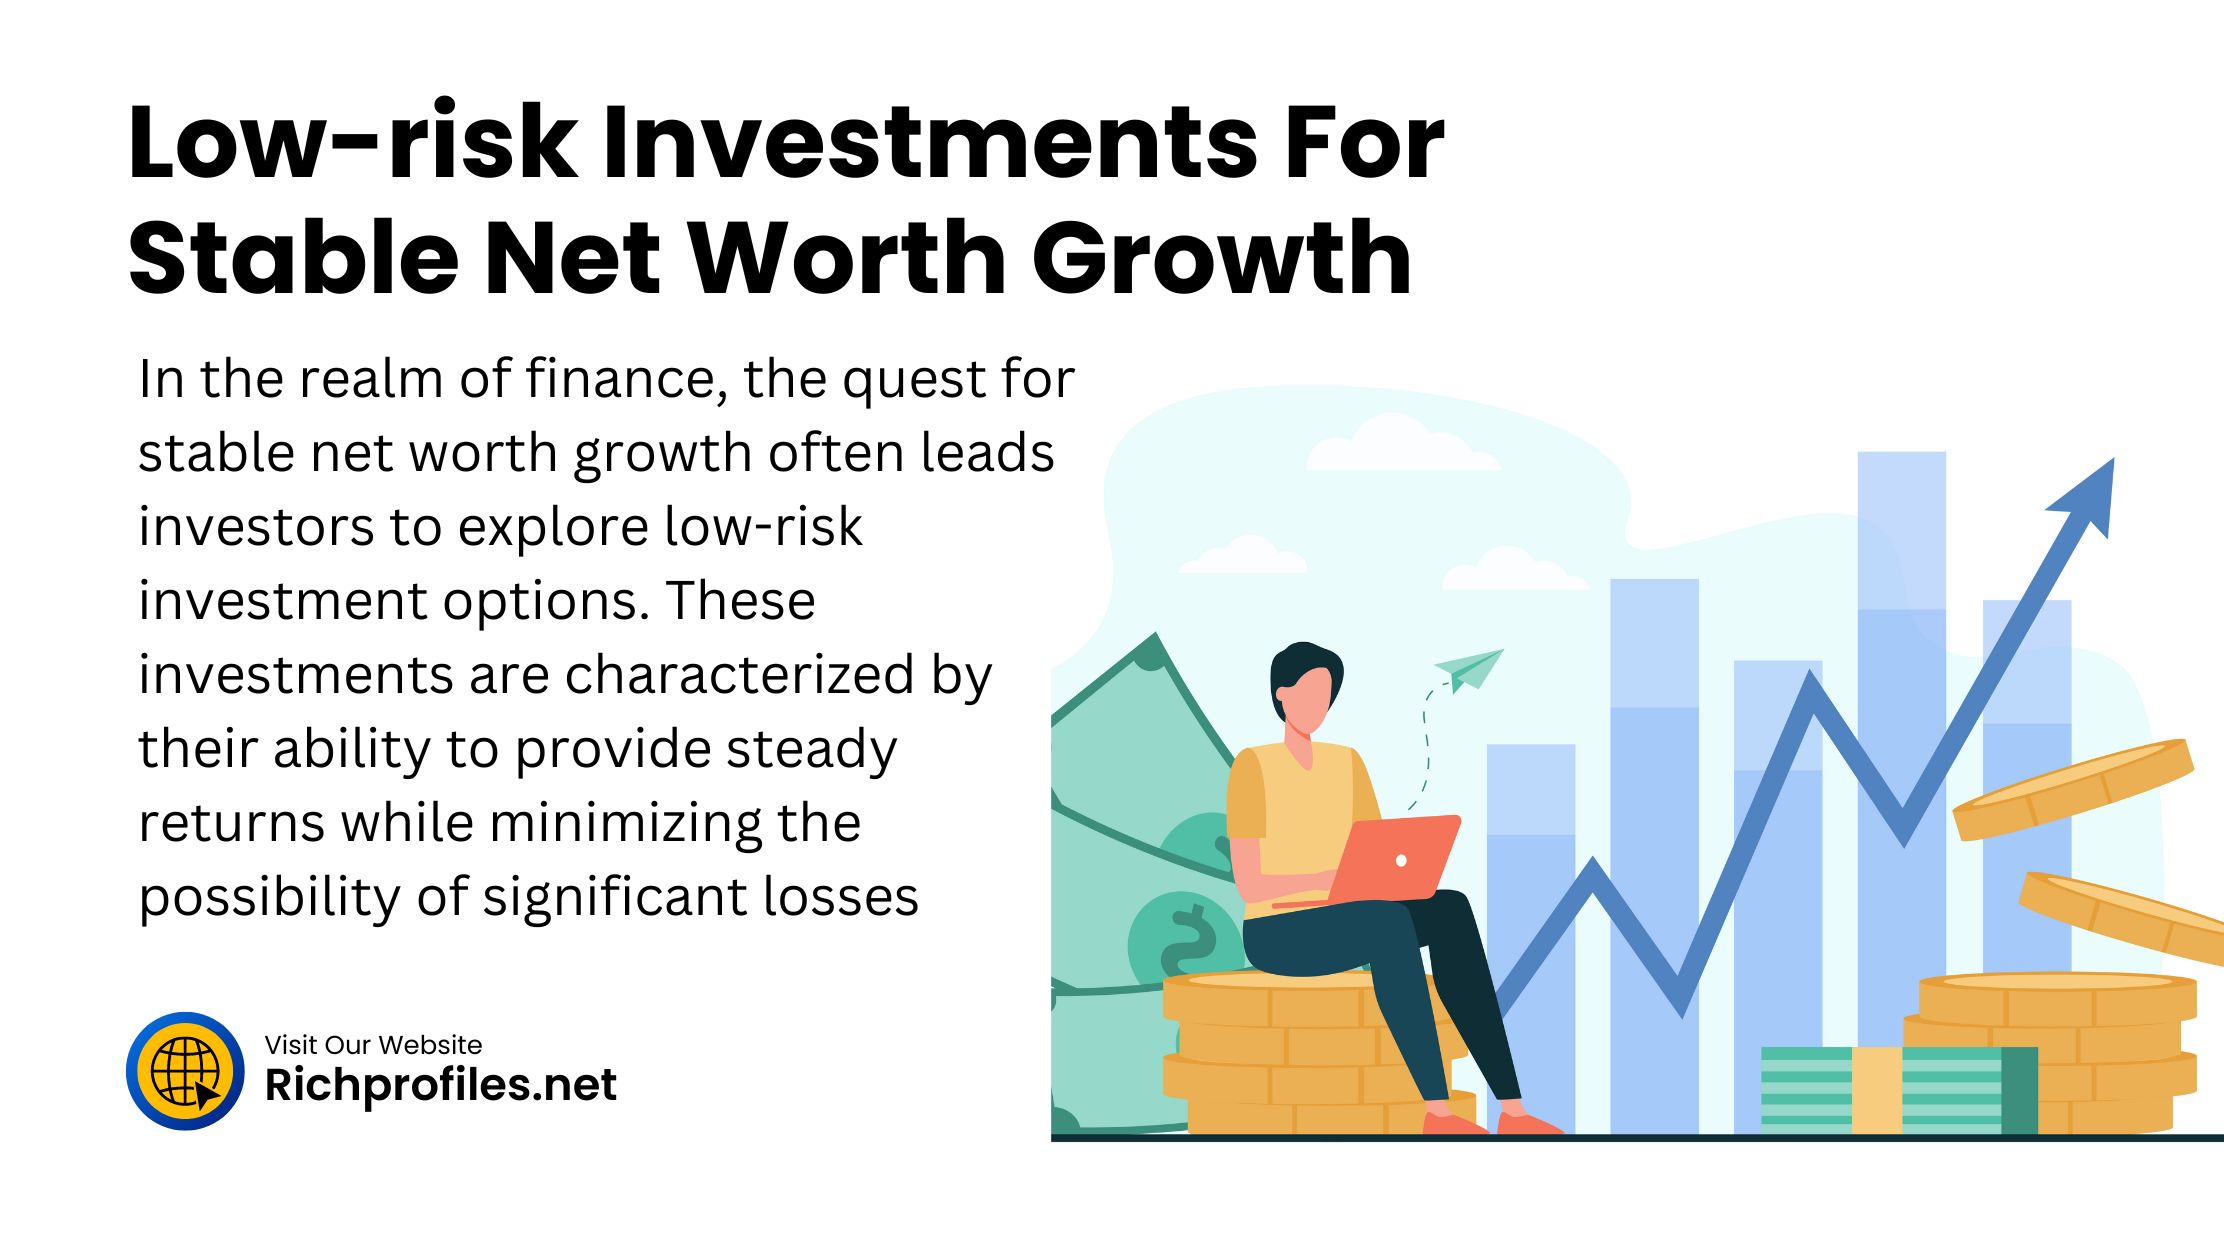 Low-risk Investments For Stable Net Worth Growth